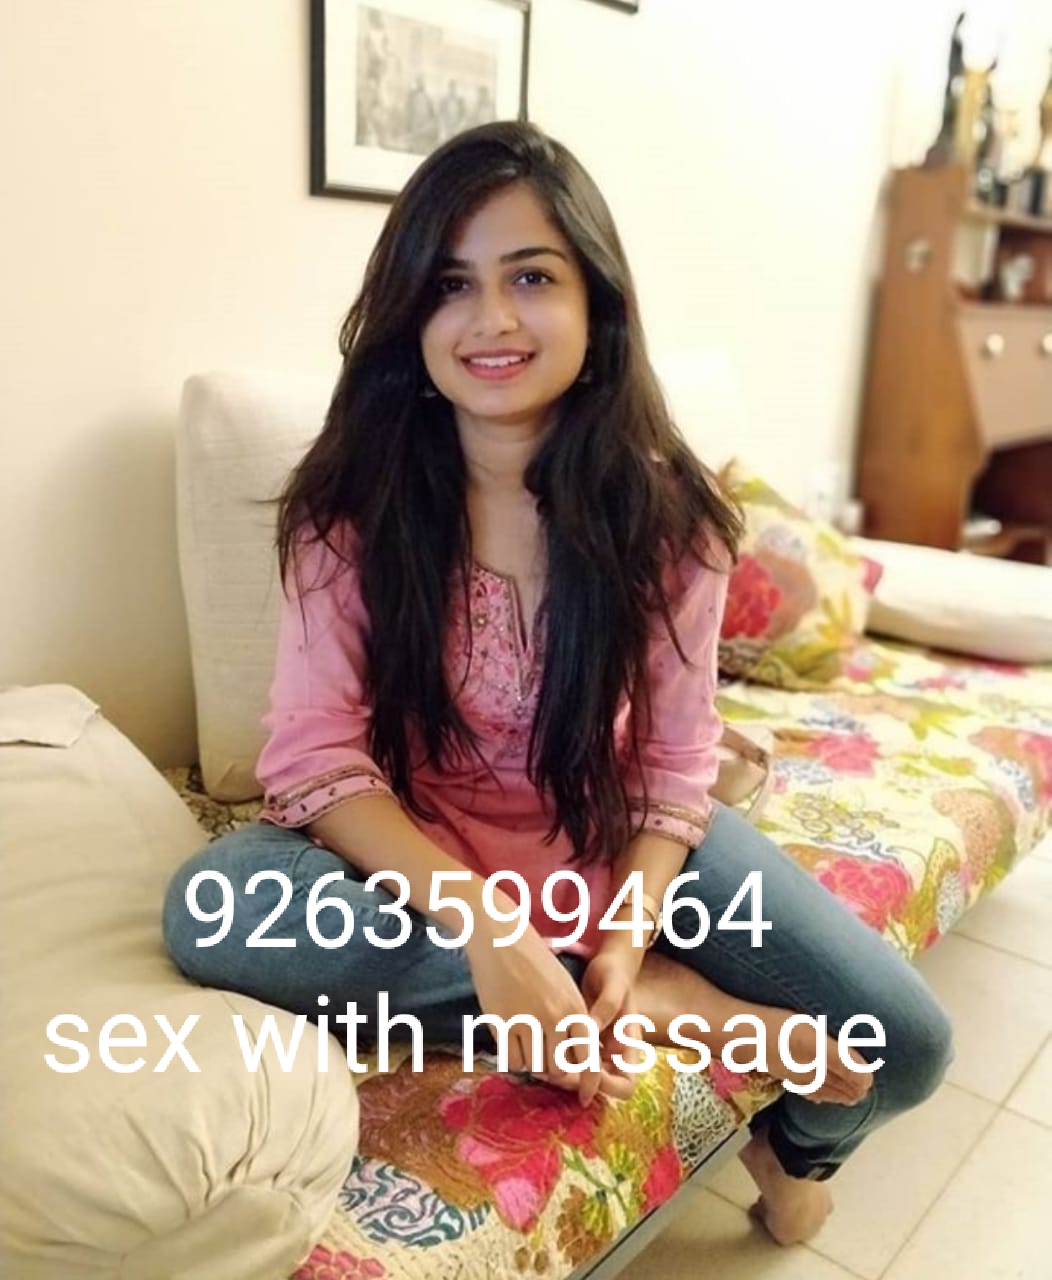 low price without condom real and genuine service call me e